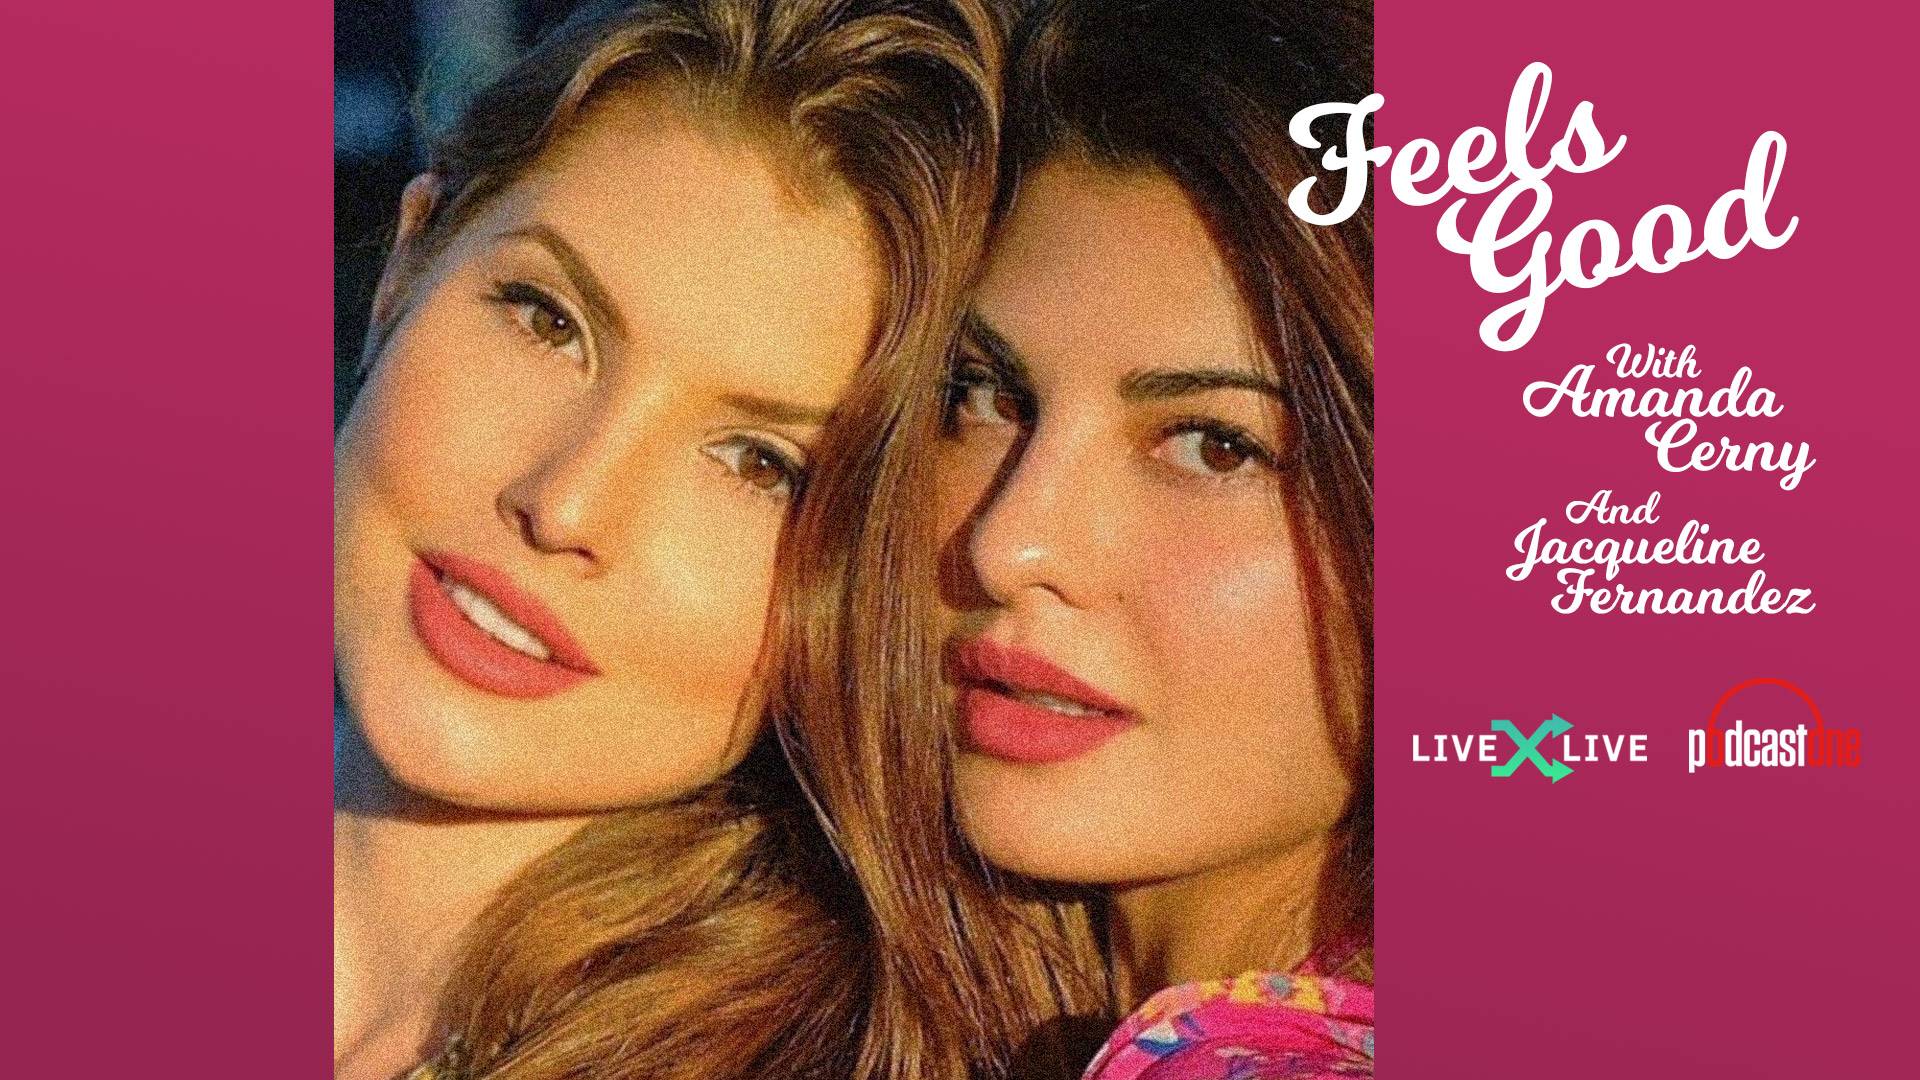 Jacqueline Bf Video - Watch Feels Good with Amanda Cerny and Jacqueline Fernandez Videos -  LiveOne - Premium Live Music